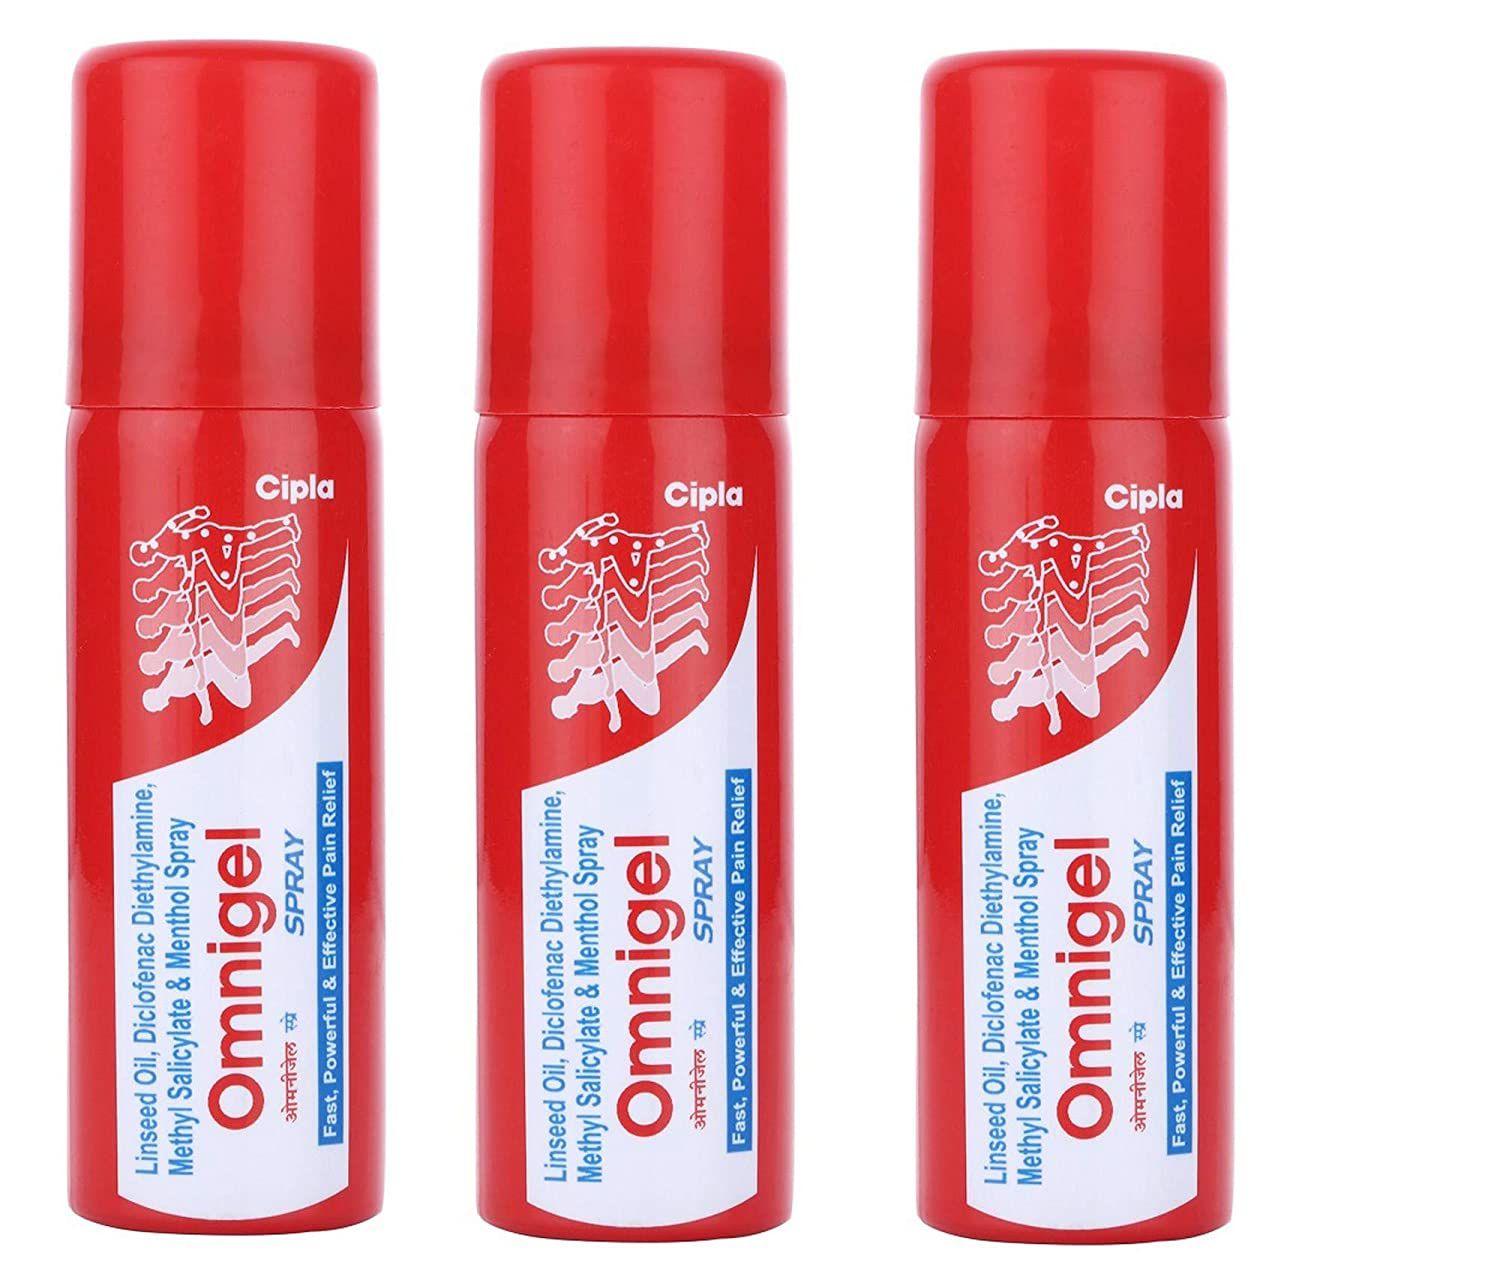     			Omni gel spray for pain relief 75gm each (Pack Of 3)